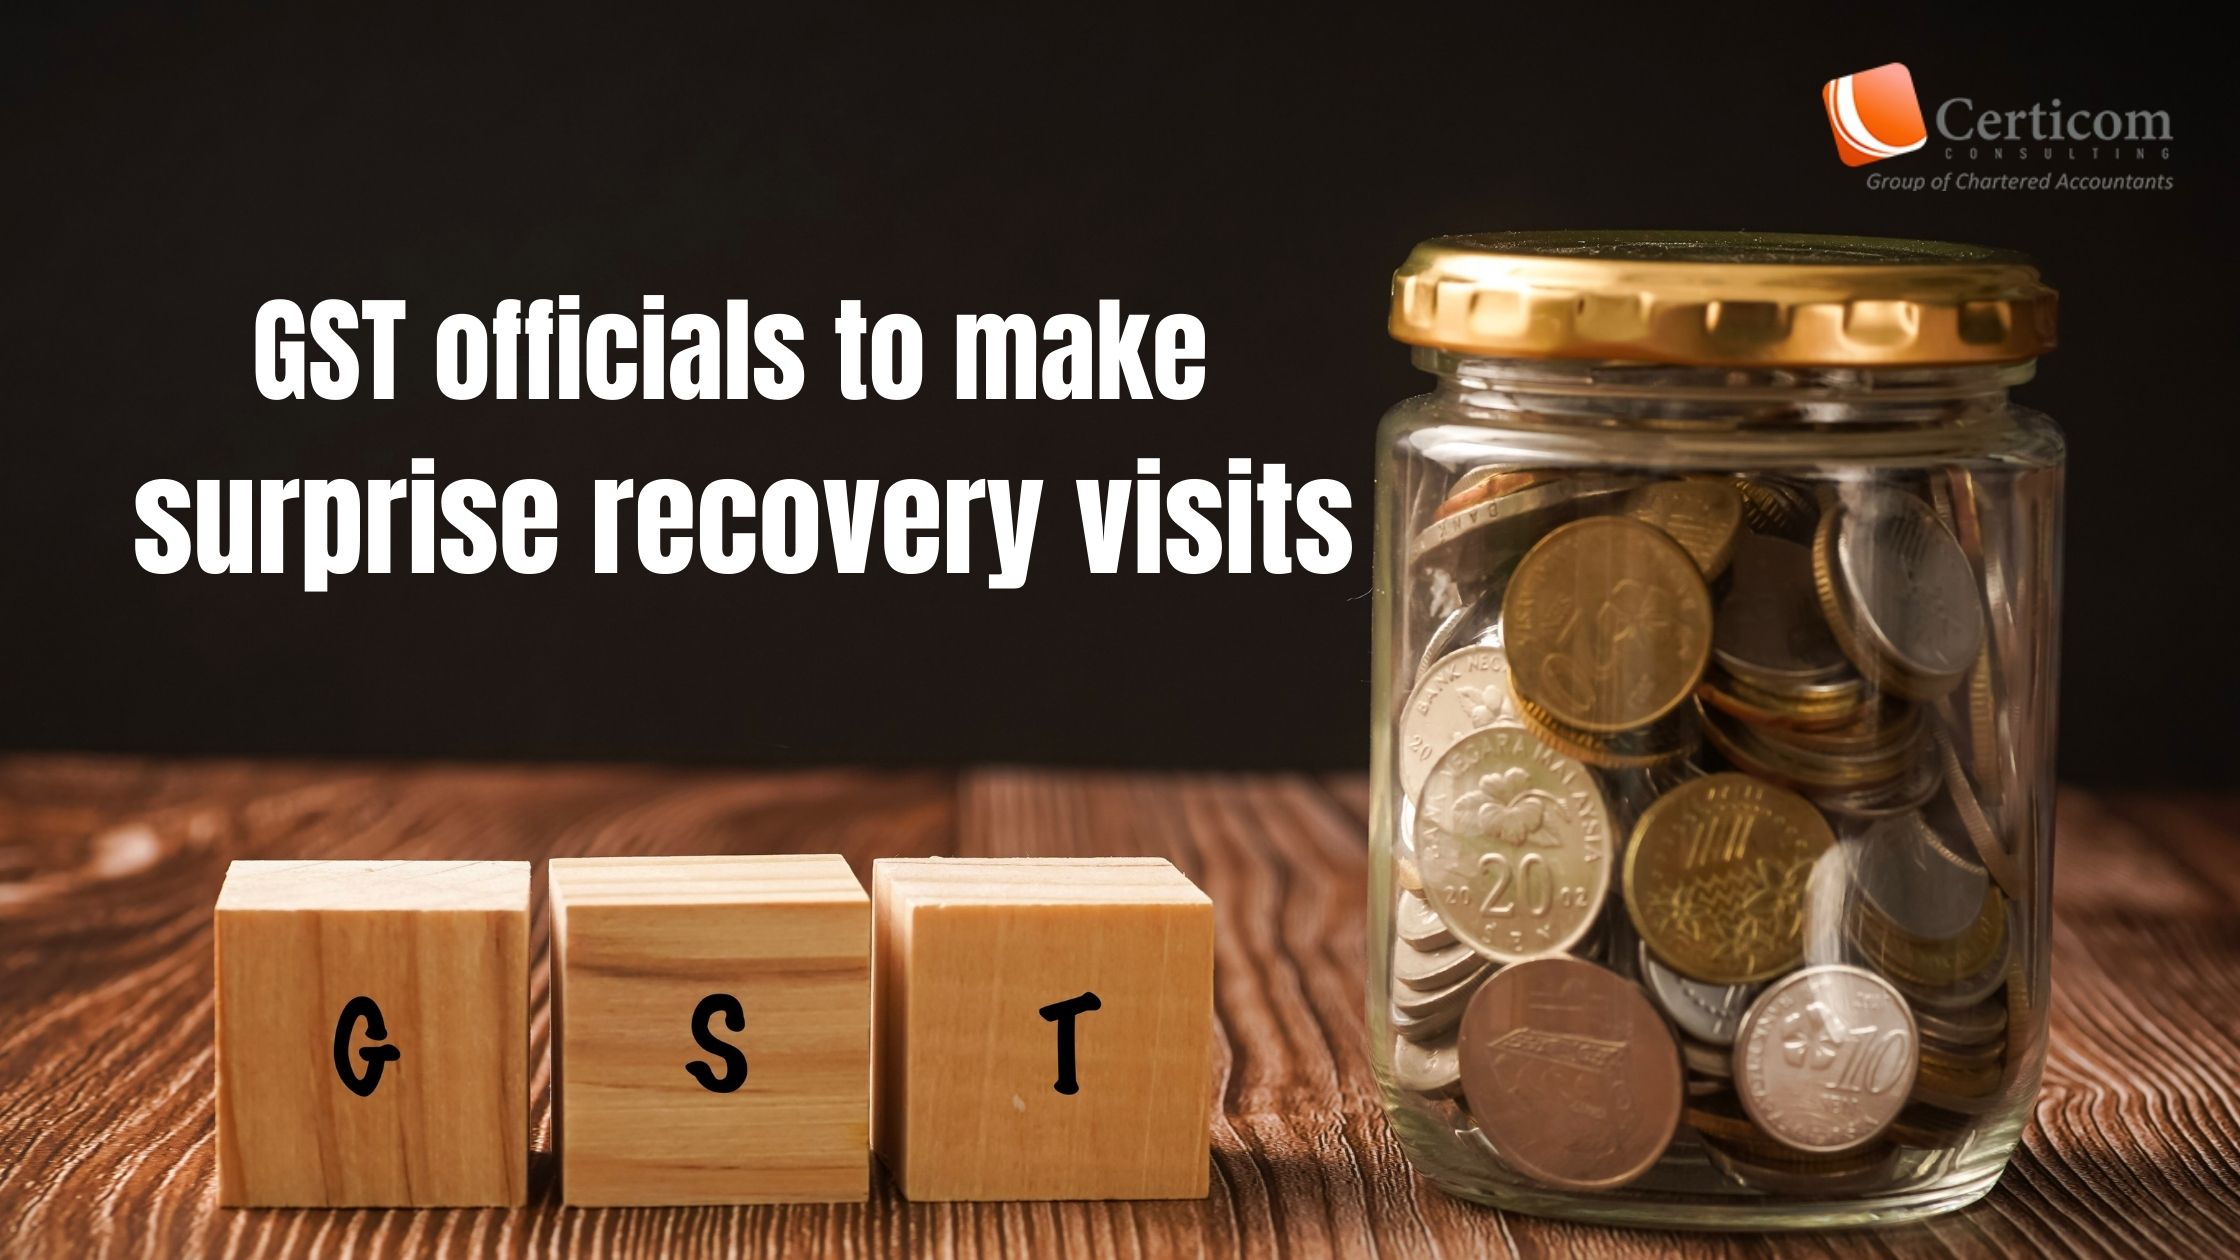 New provision from Jan 1: GST officials to make surprise recovery visits